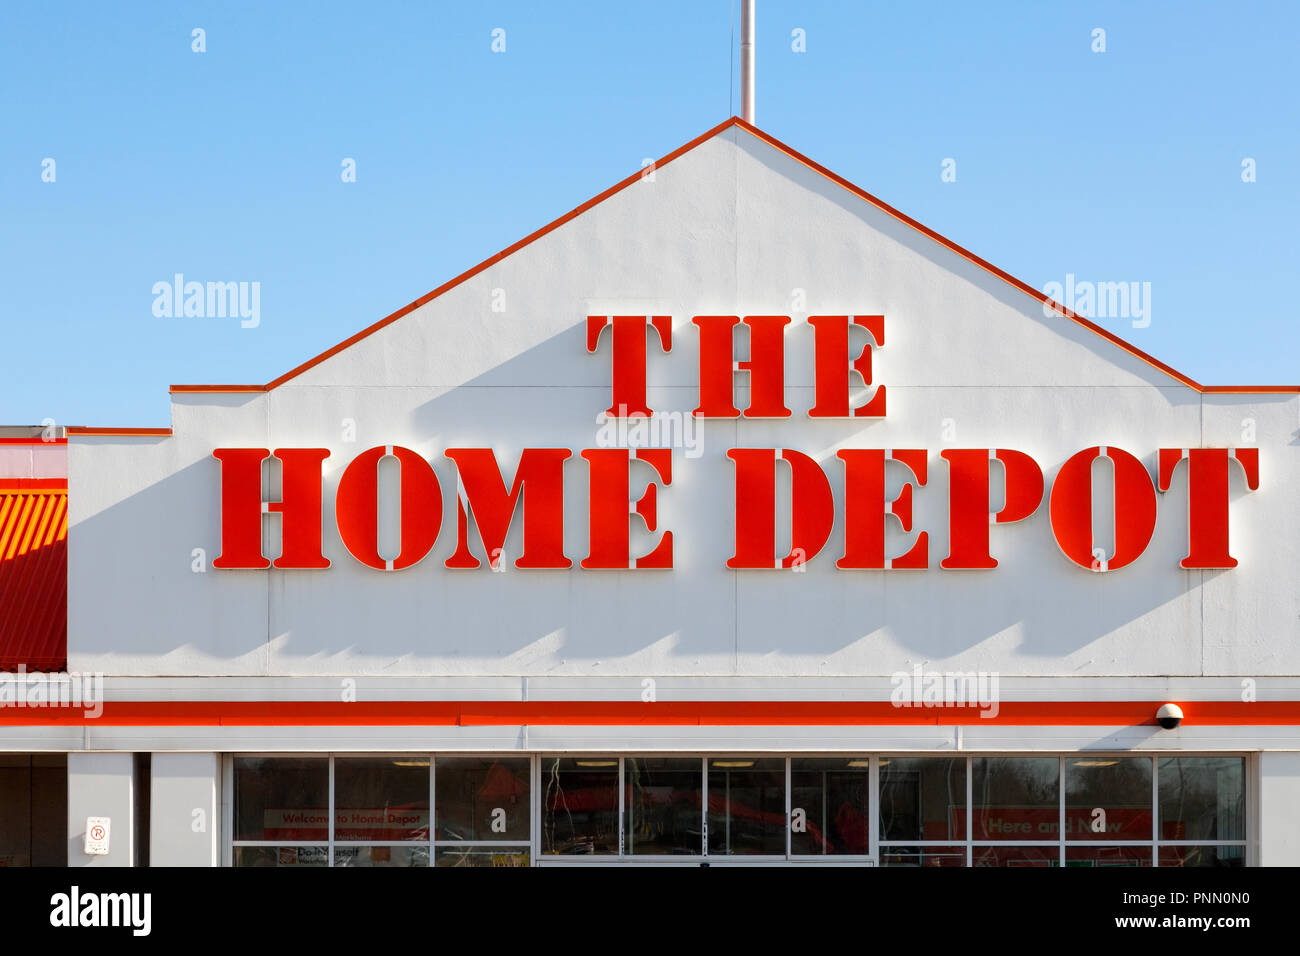 Home Depot And Lowe's Are Booming In A Housing Market Bust, 40% OFF